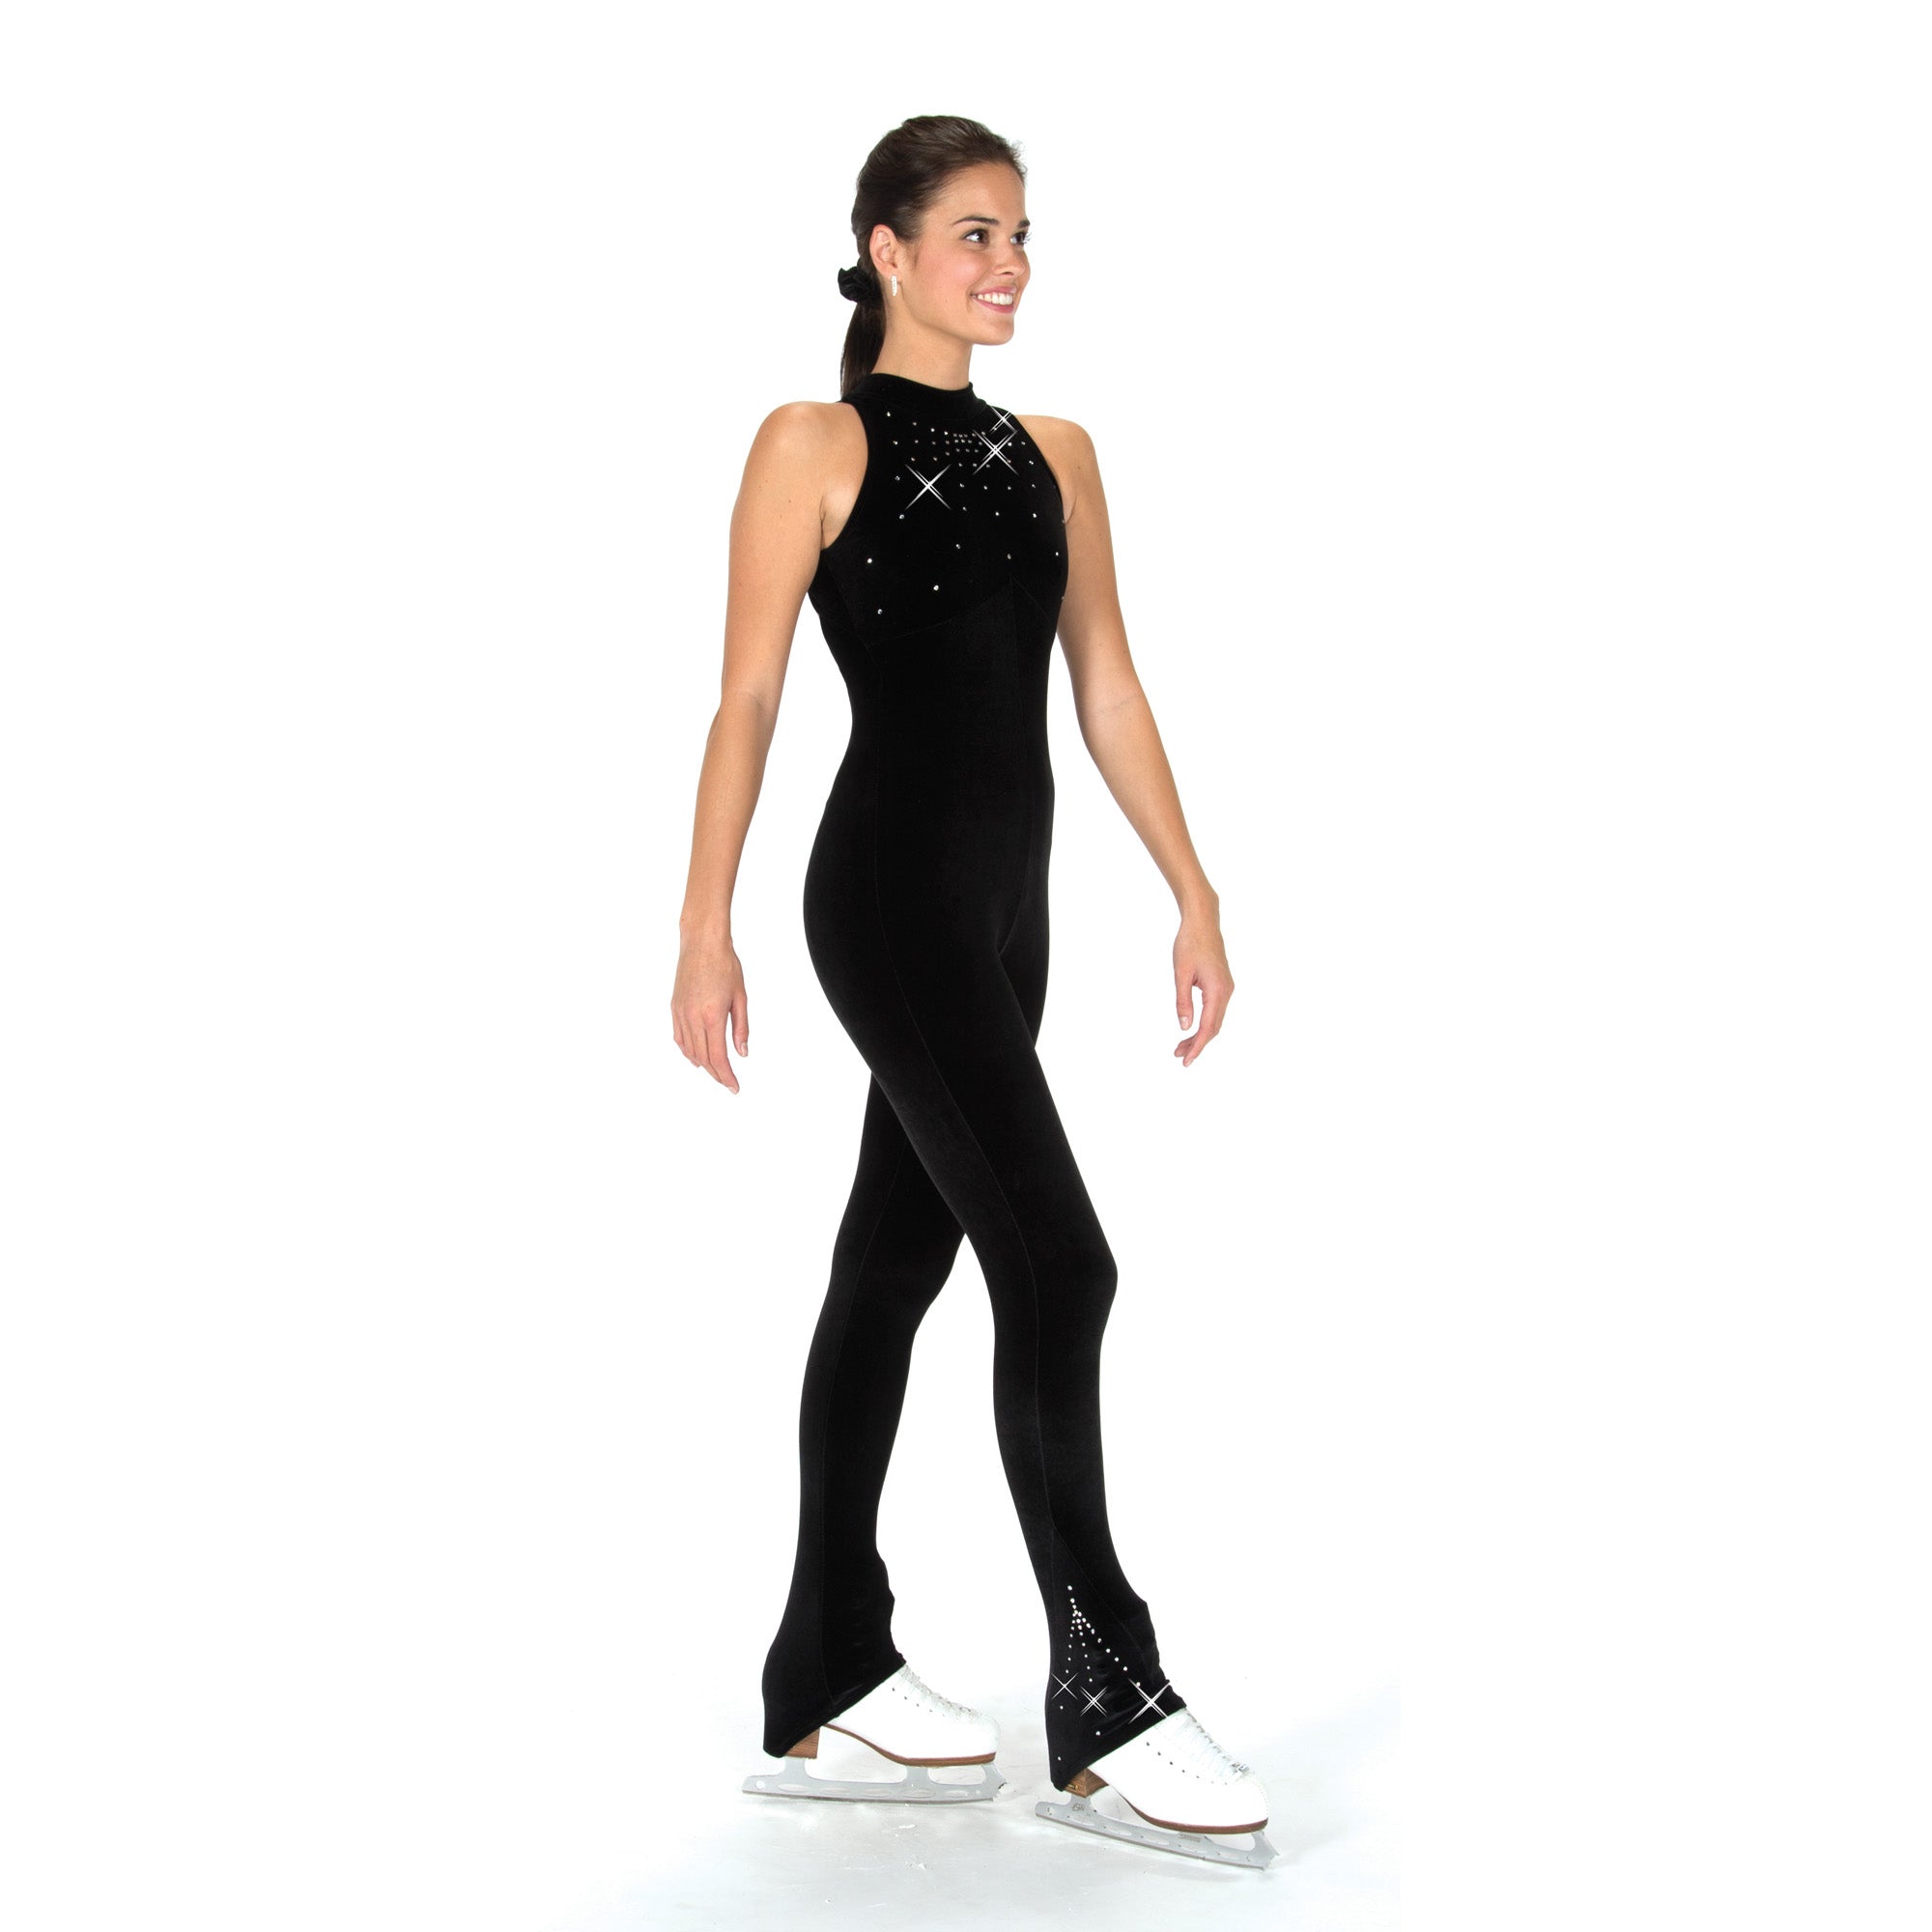 290 High Neck Catsuit Leotard for Skating by Jerry's